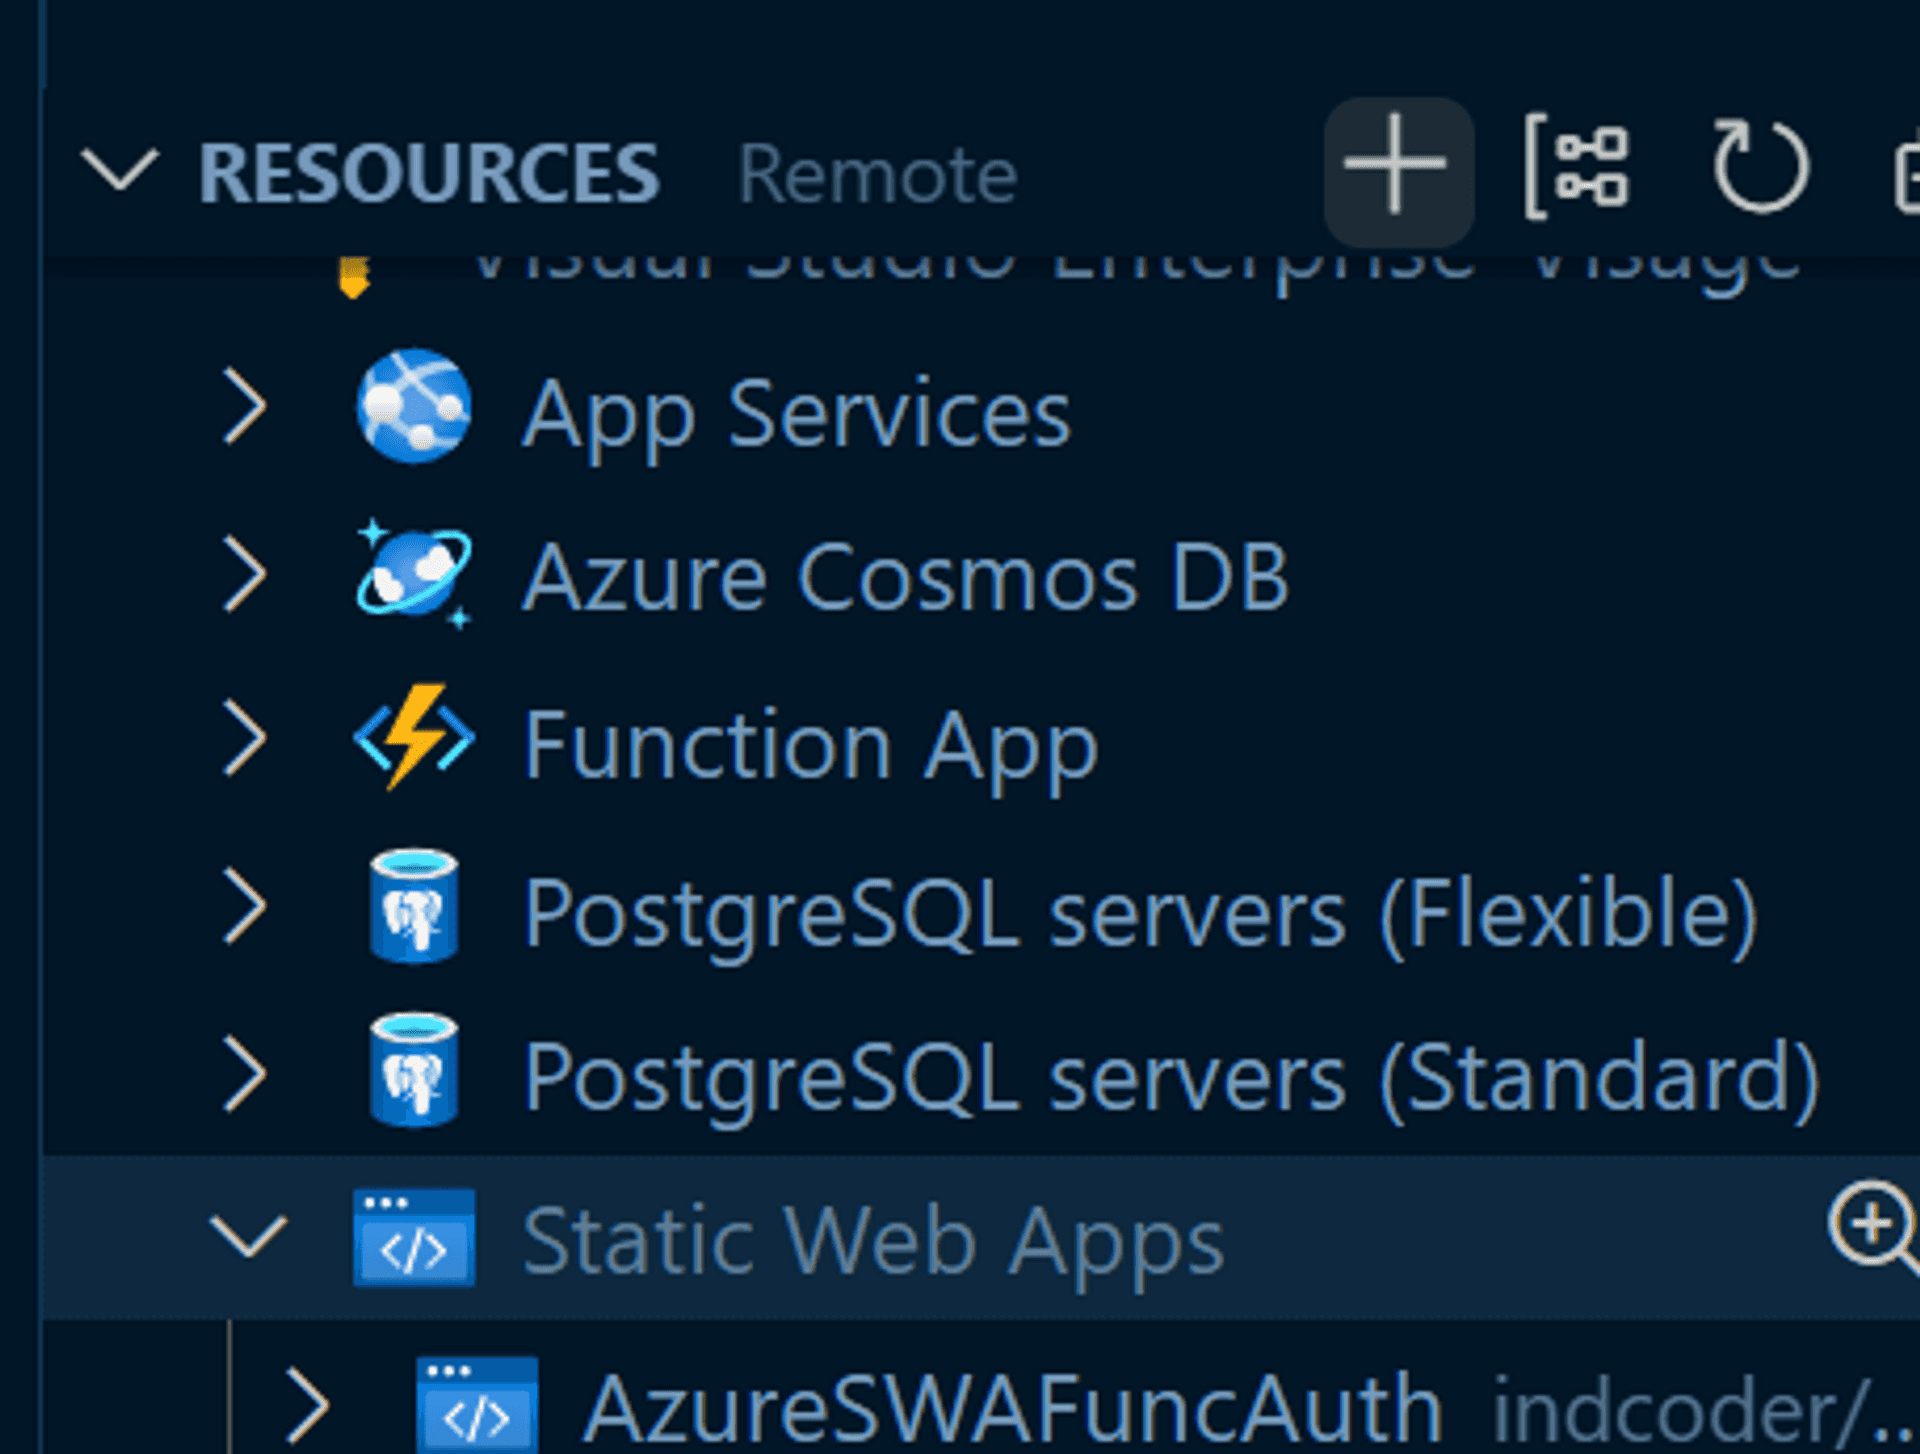 The Azure VS Code extension is expanded out and its various resources are visible